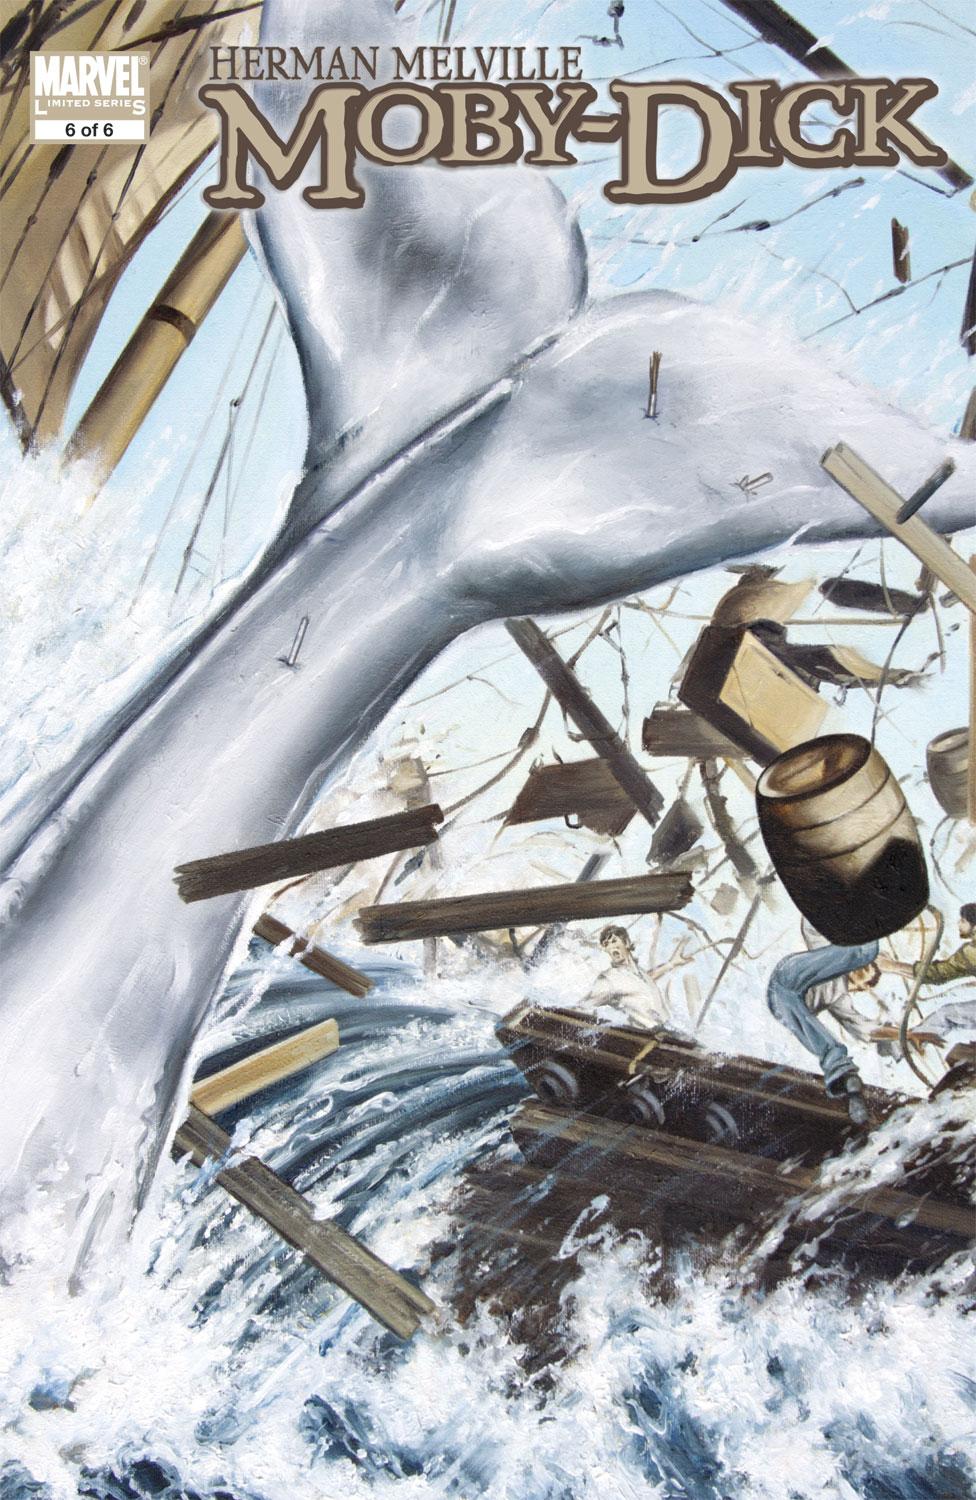 Marvel Illustrated: Moby Dick (2007) #6